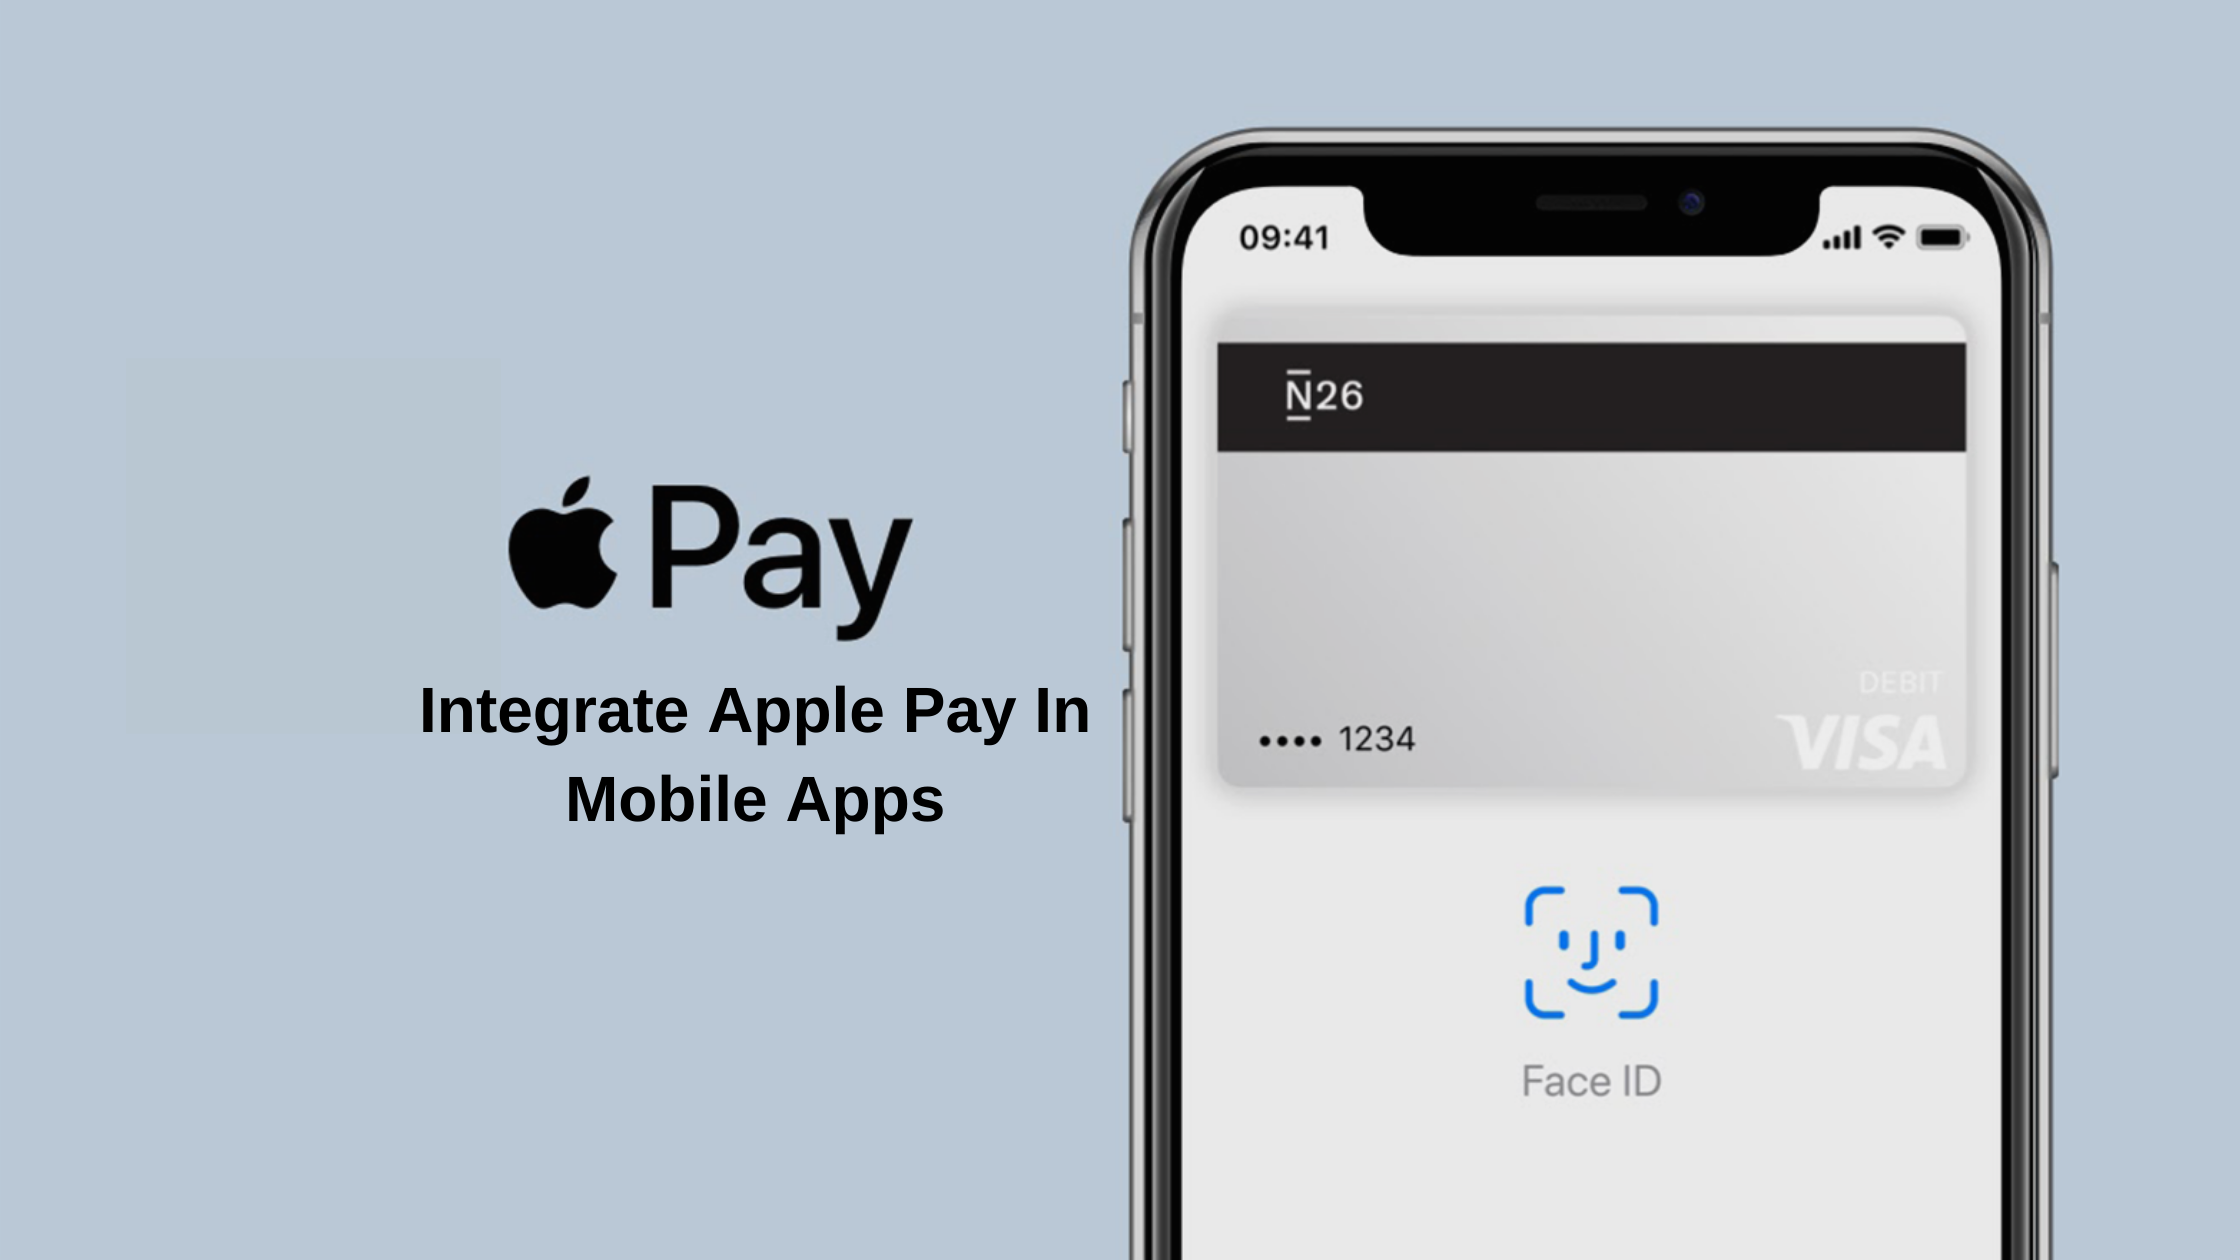 The Opportunities Of Integrating Apple Pay In Mobile Apps